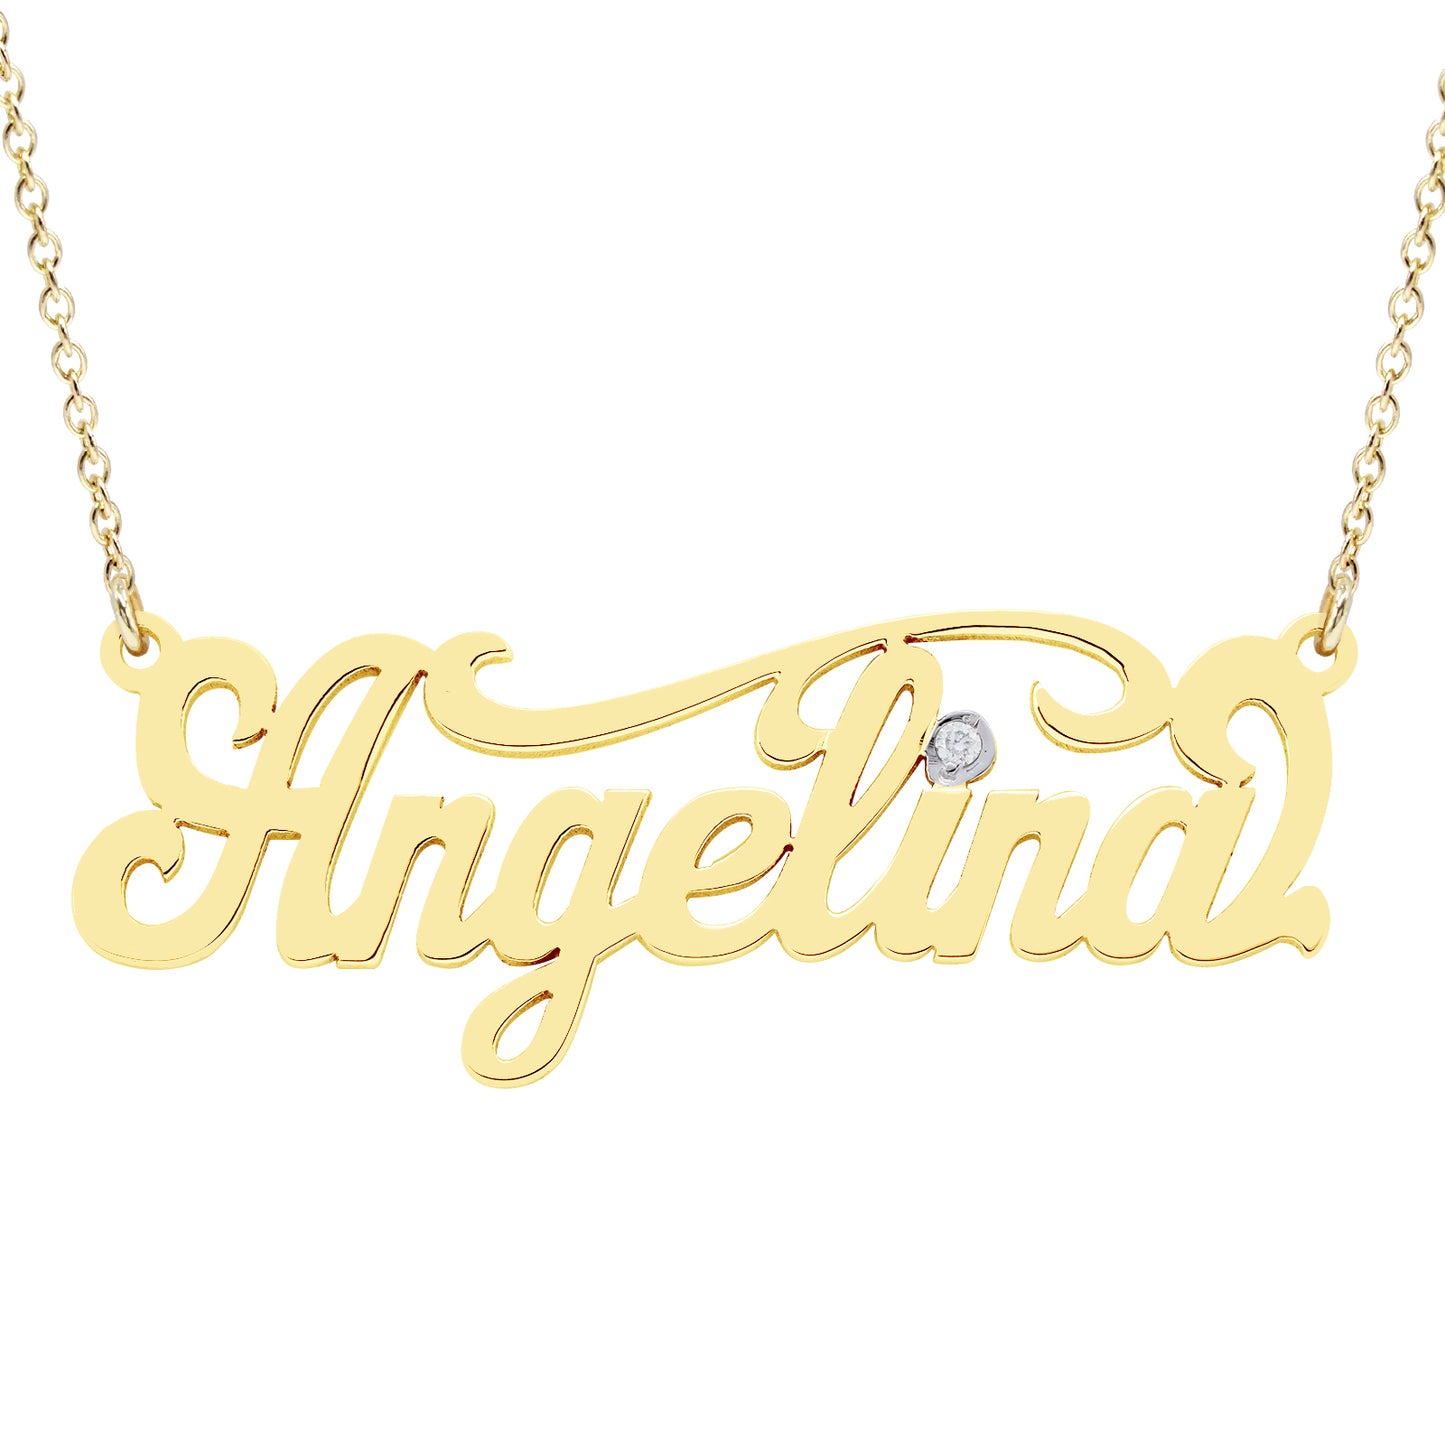 Fancy Script Nameplate Necklace with Accent Diamond option in High Polish 14K Gold